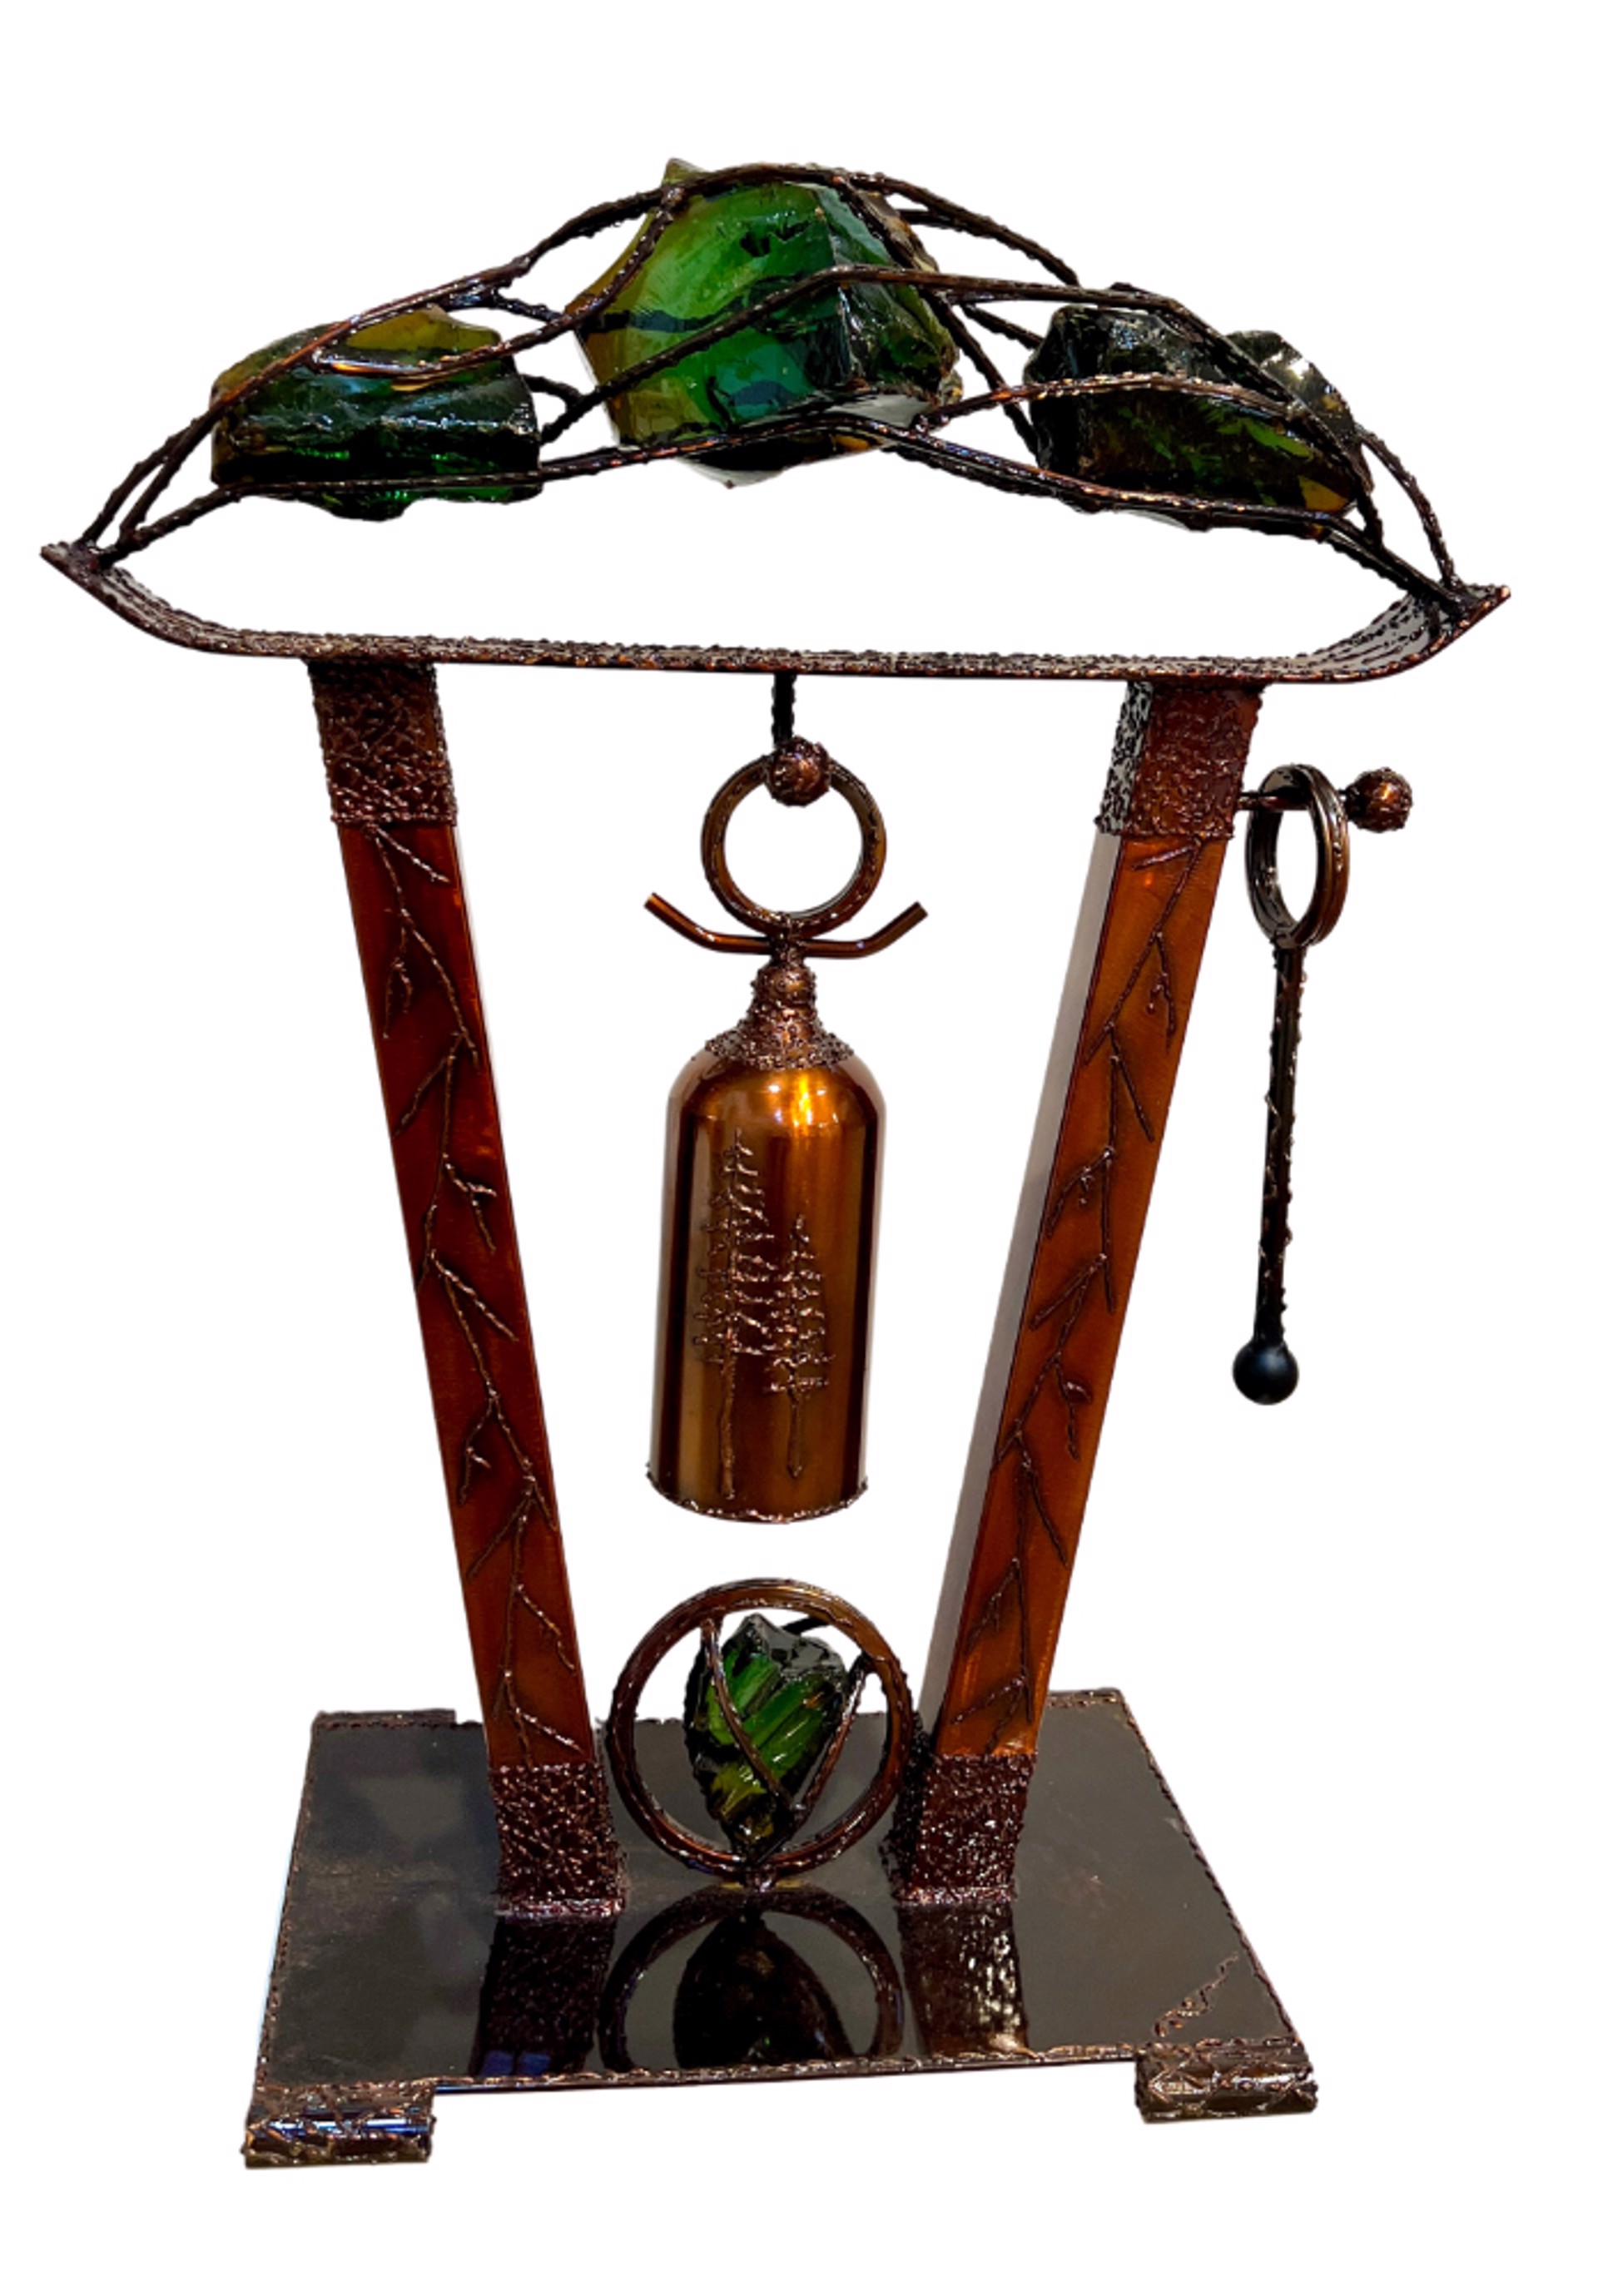 Desktop Bell Sculpture with Pine Trees and a Crown of Glass - Three by Mike Beals